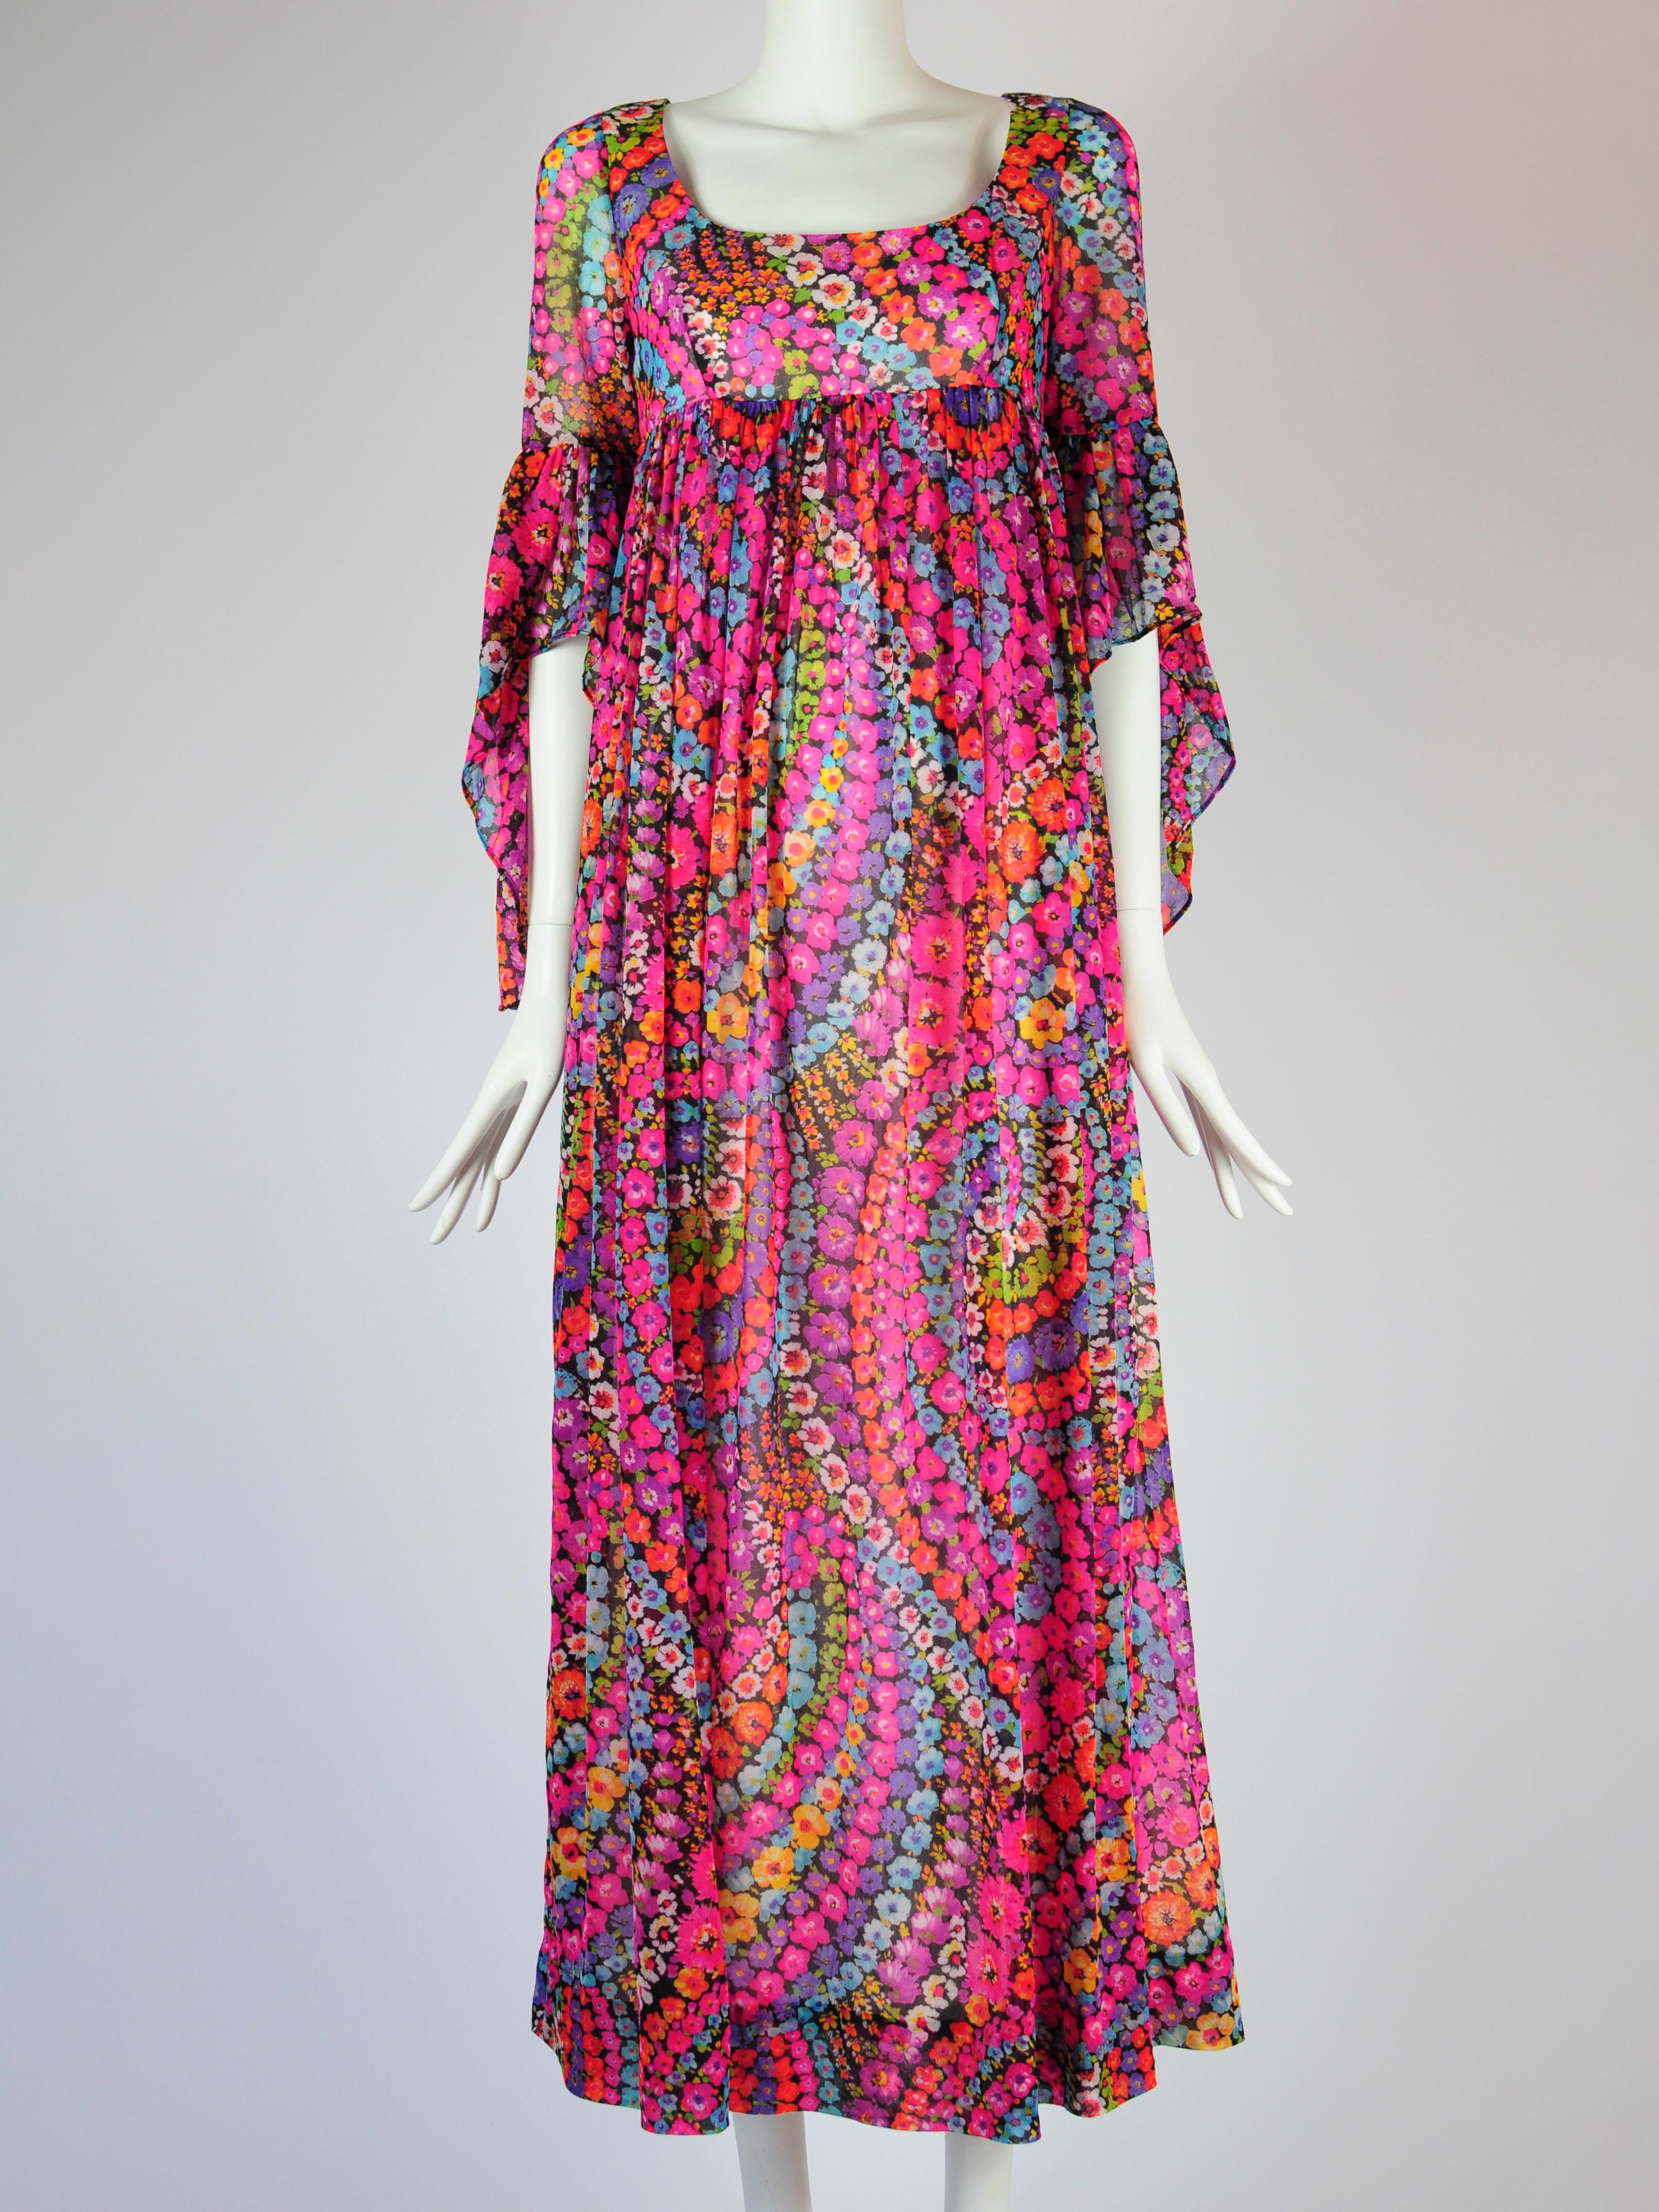 Psychedelic Flower Goddess Dress Empire Waist Butterfly Sleeve Quad London 1970s In Good Condition For Sale In AMSTERDAM, NL